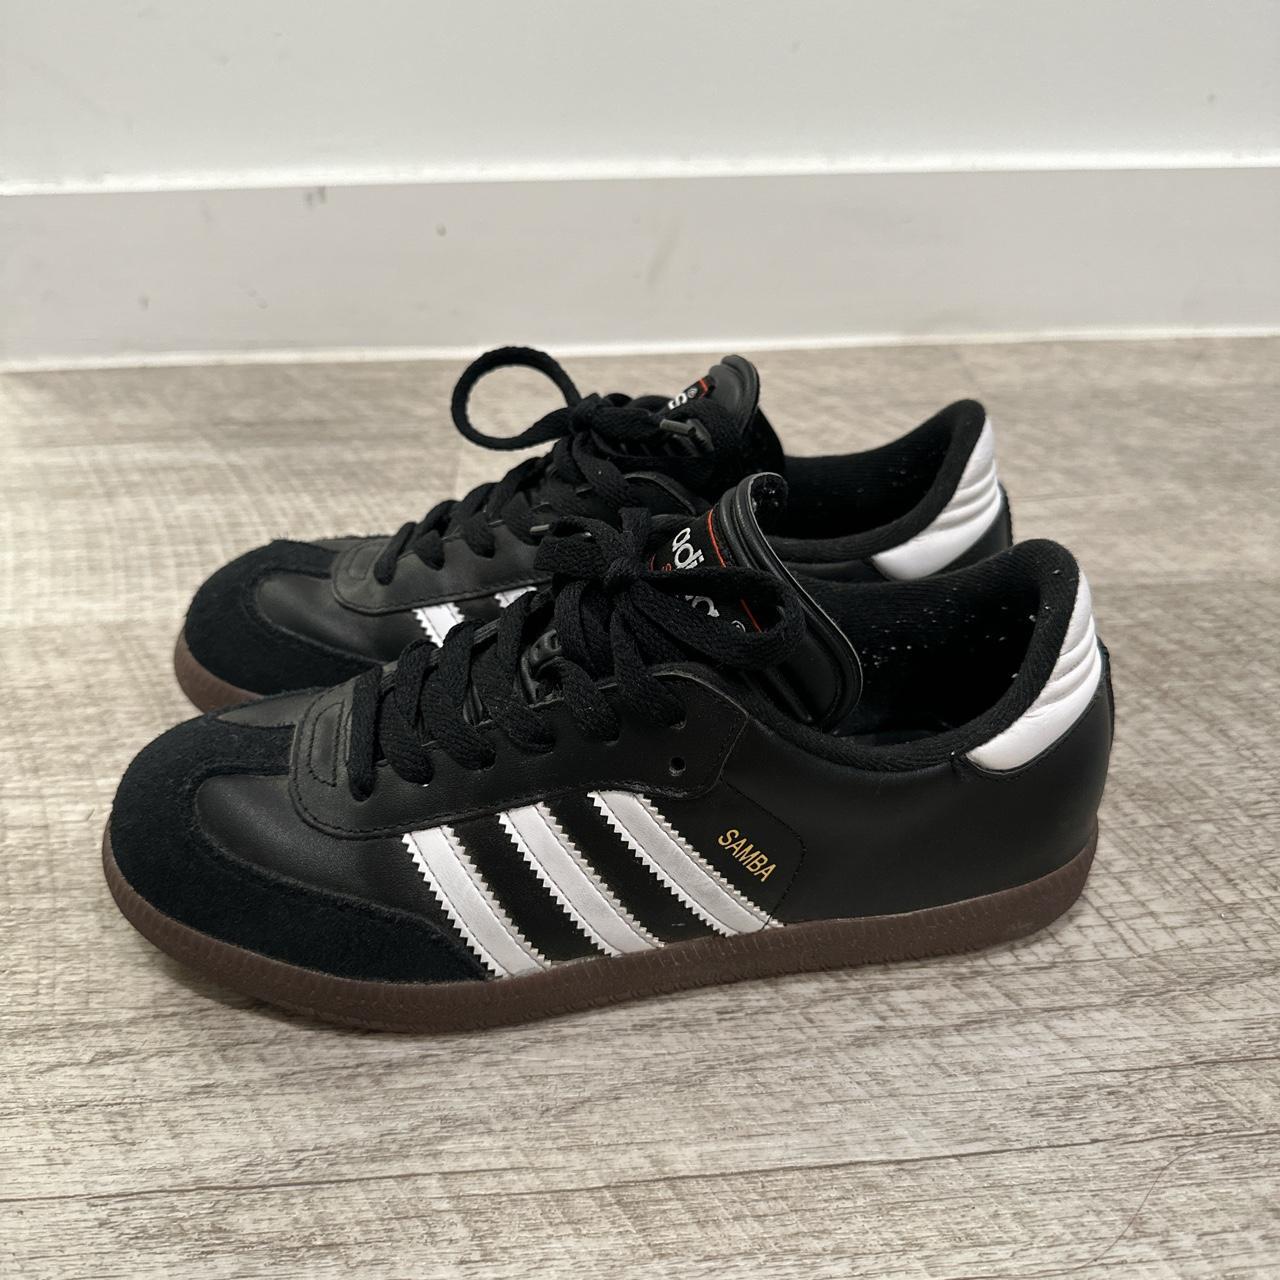 Adidas Women's Black and White Trainers (2)